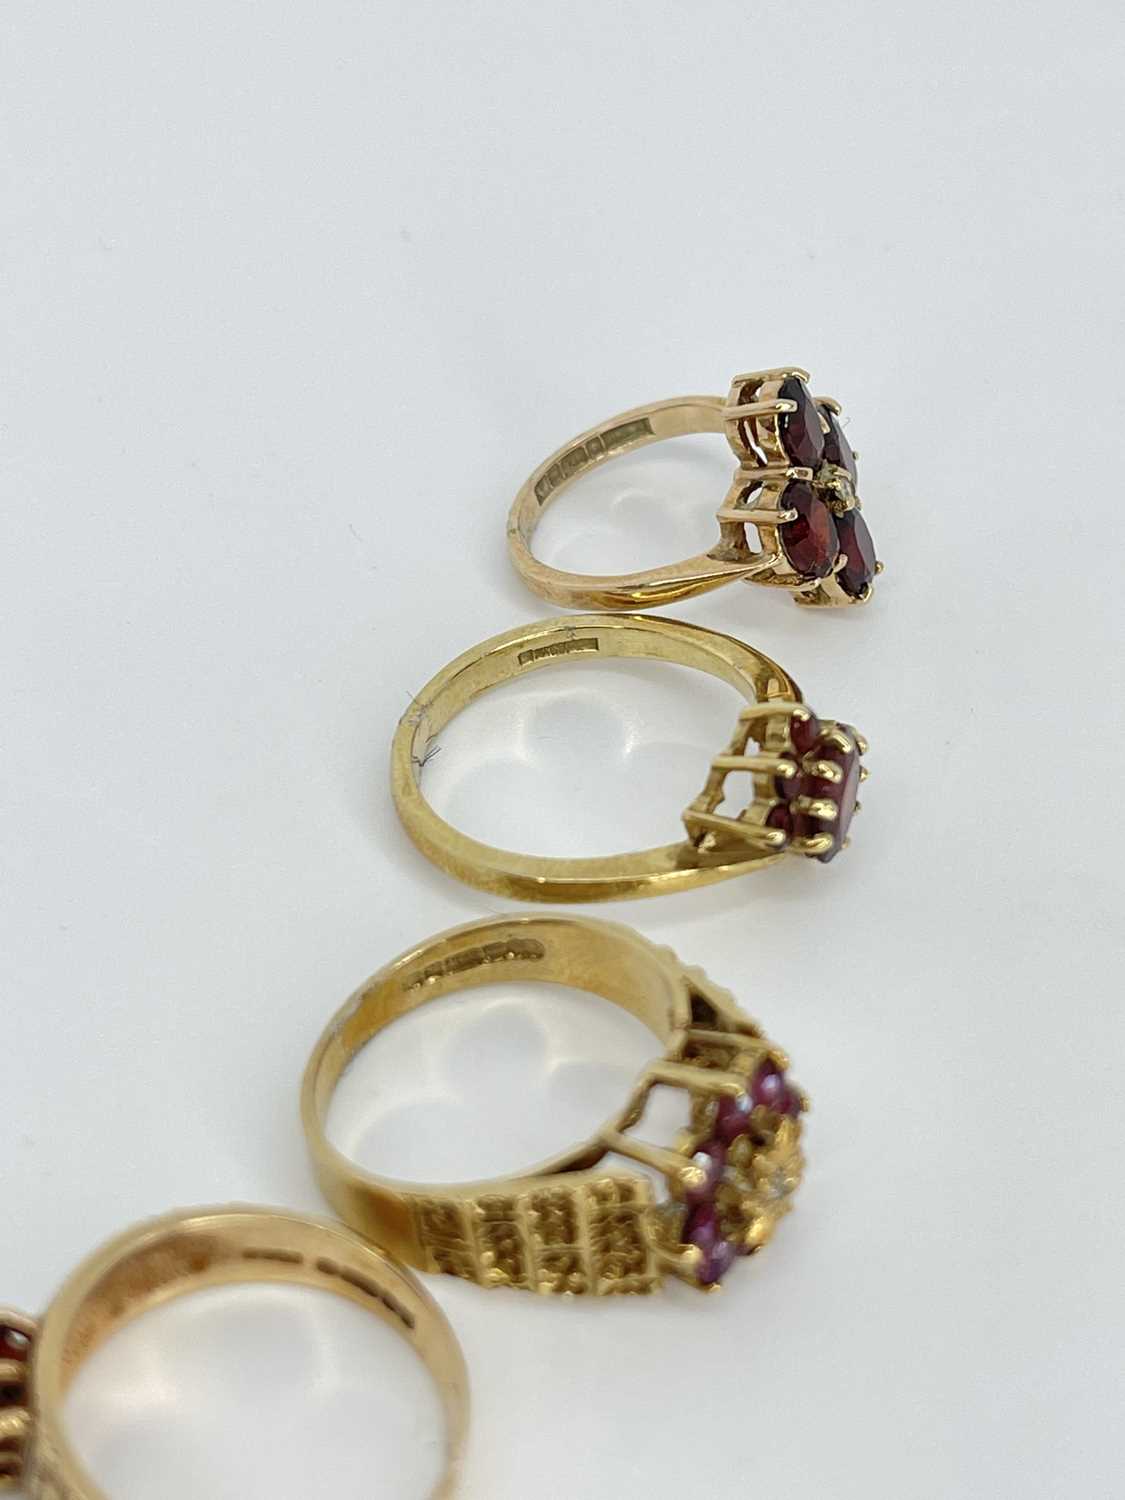 Mixed Lot Of four 9ct Gold Rings, Ruby, Diamond And Garnets ( 11.5 grams ) - Image 3 of 3